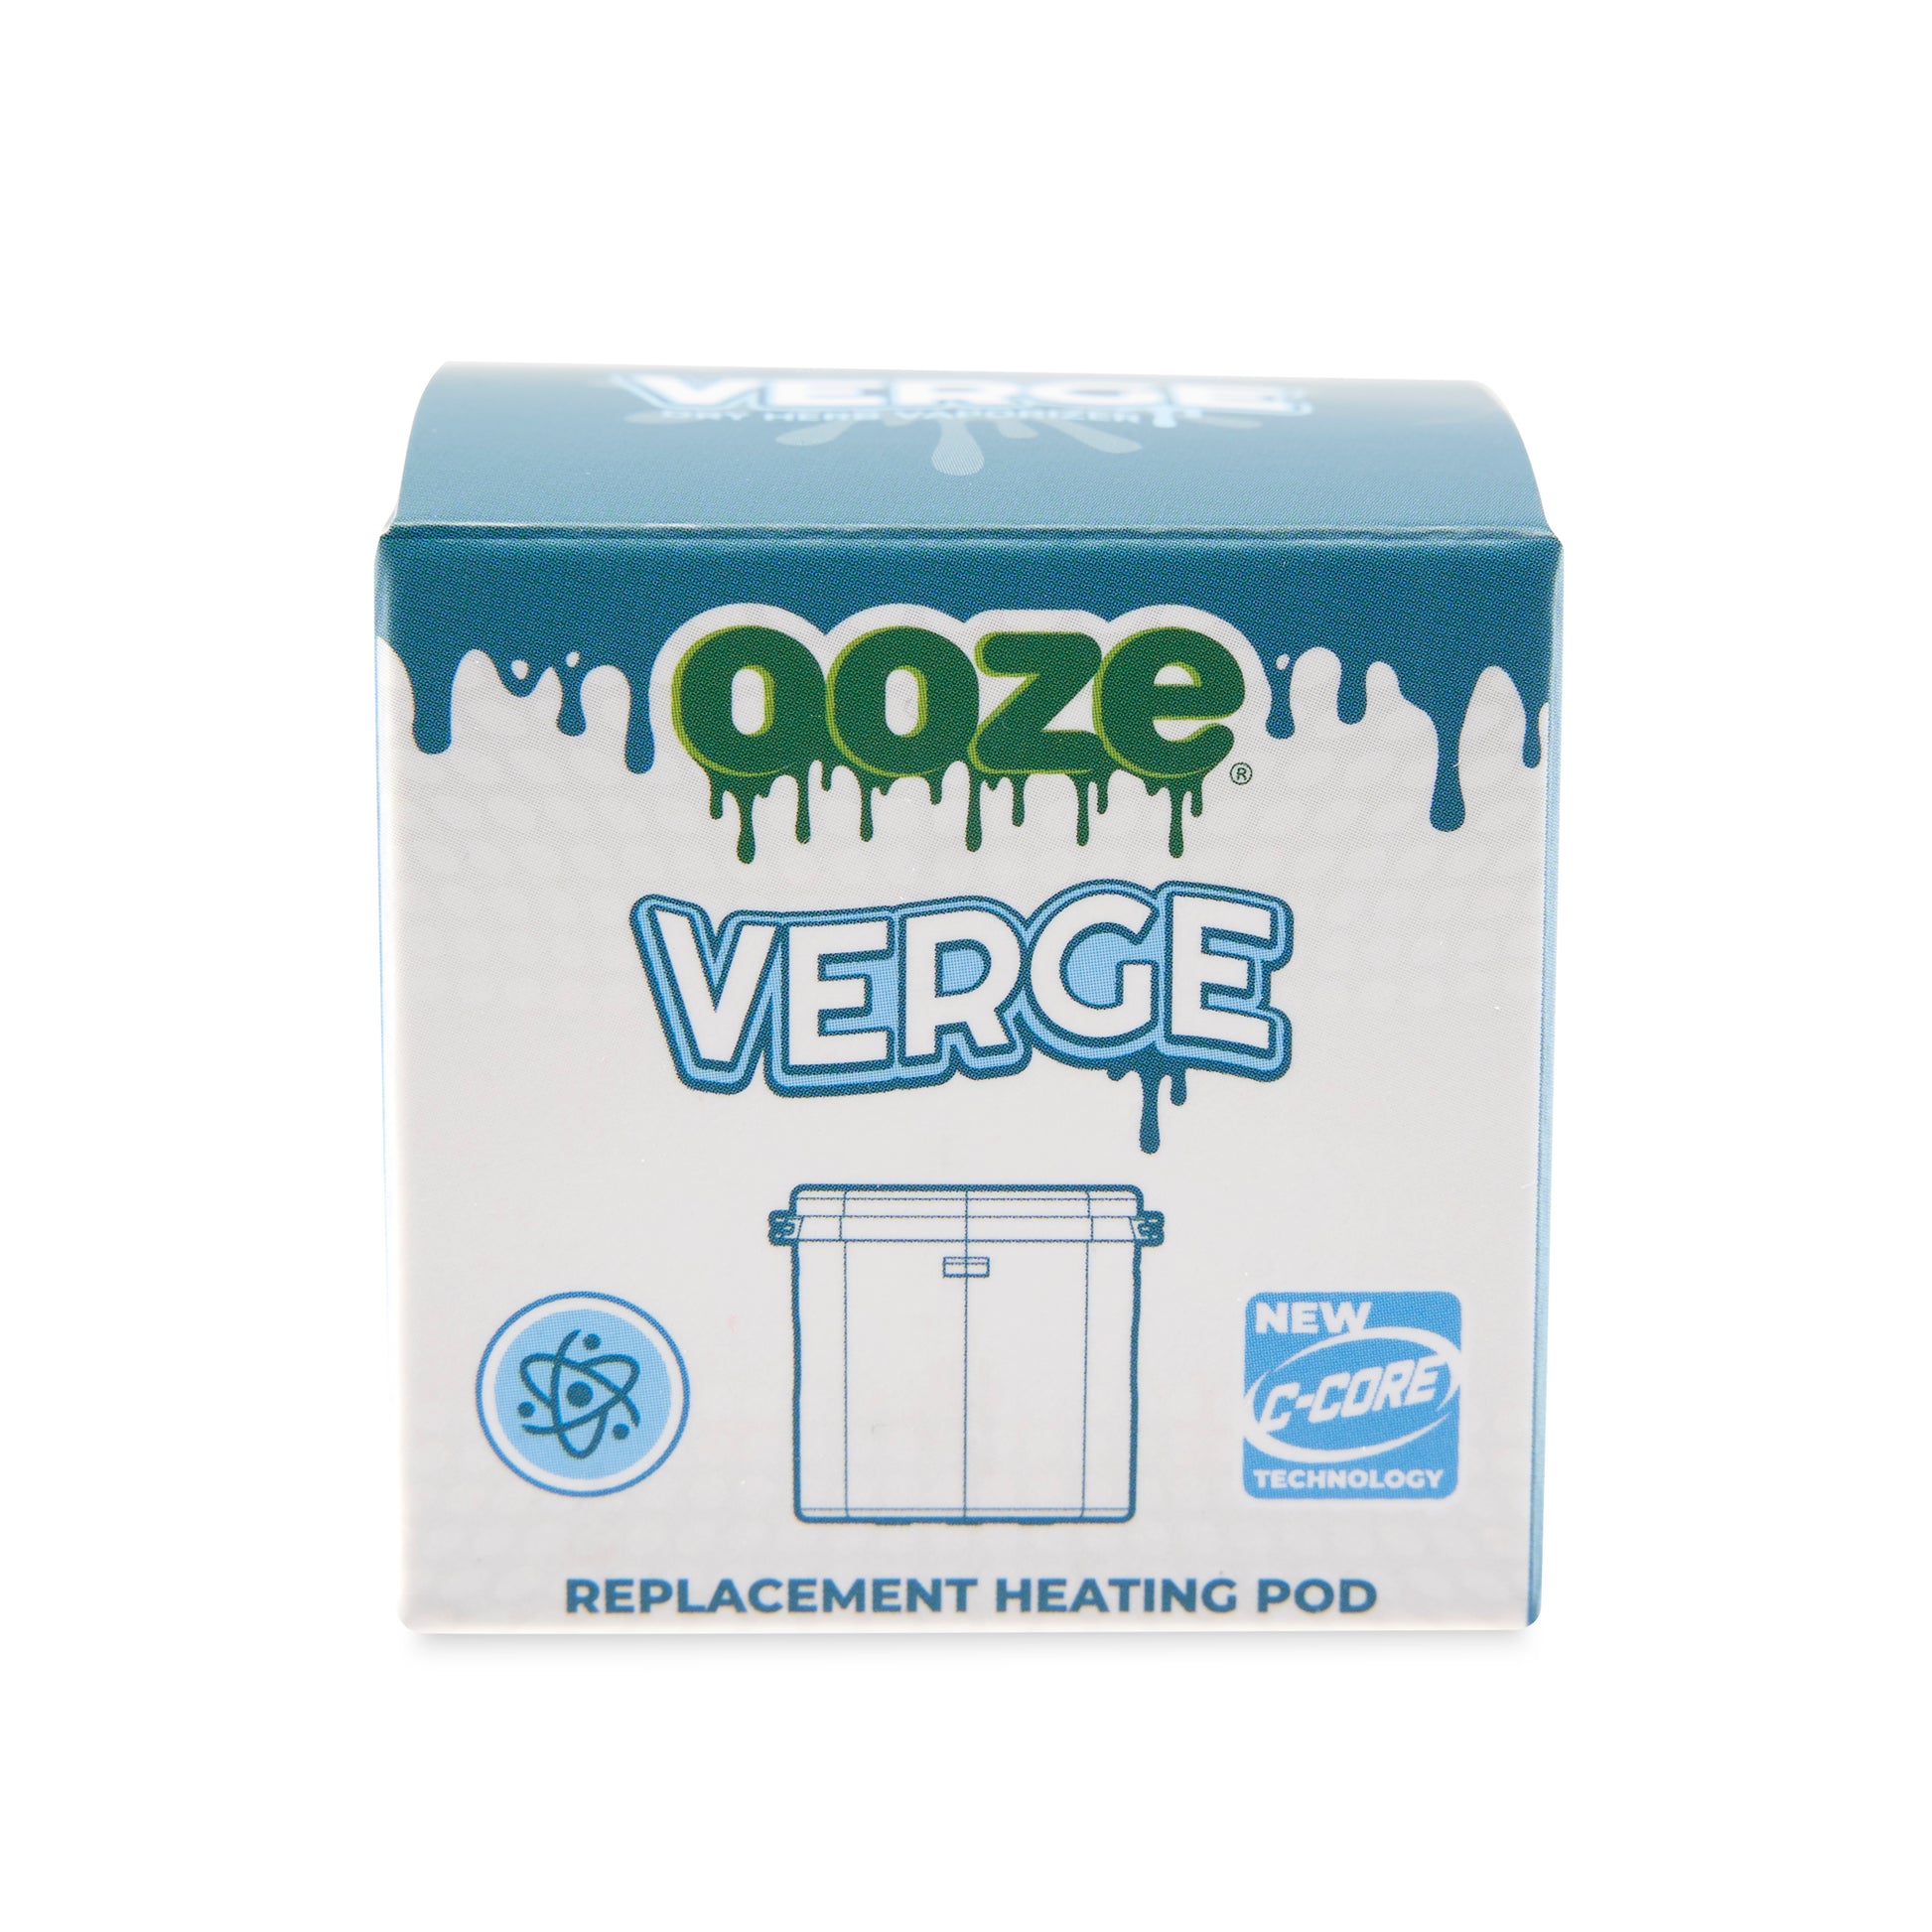 The front of the Ooze Verge replacement heating pod.